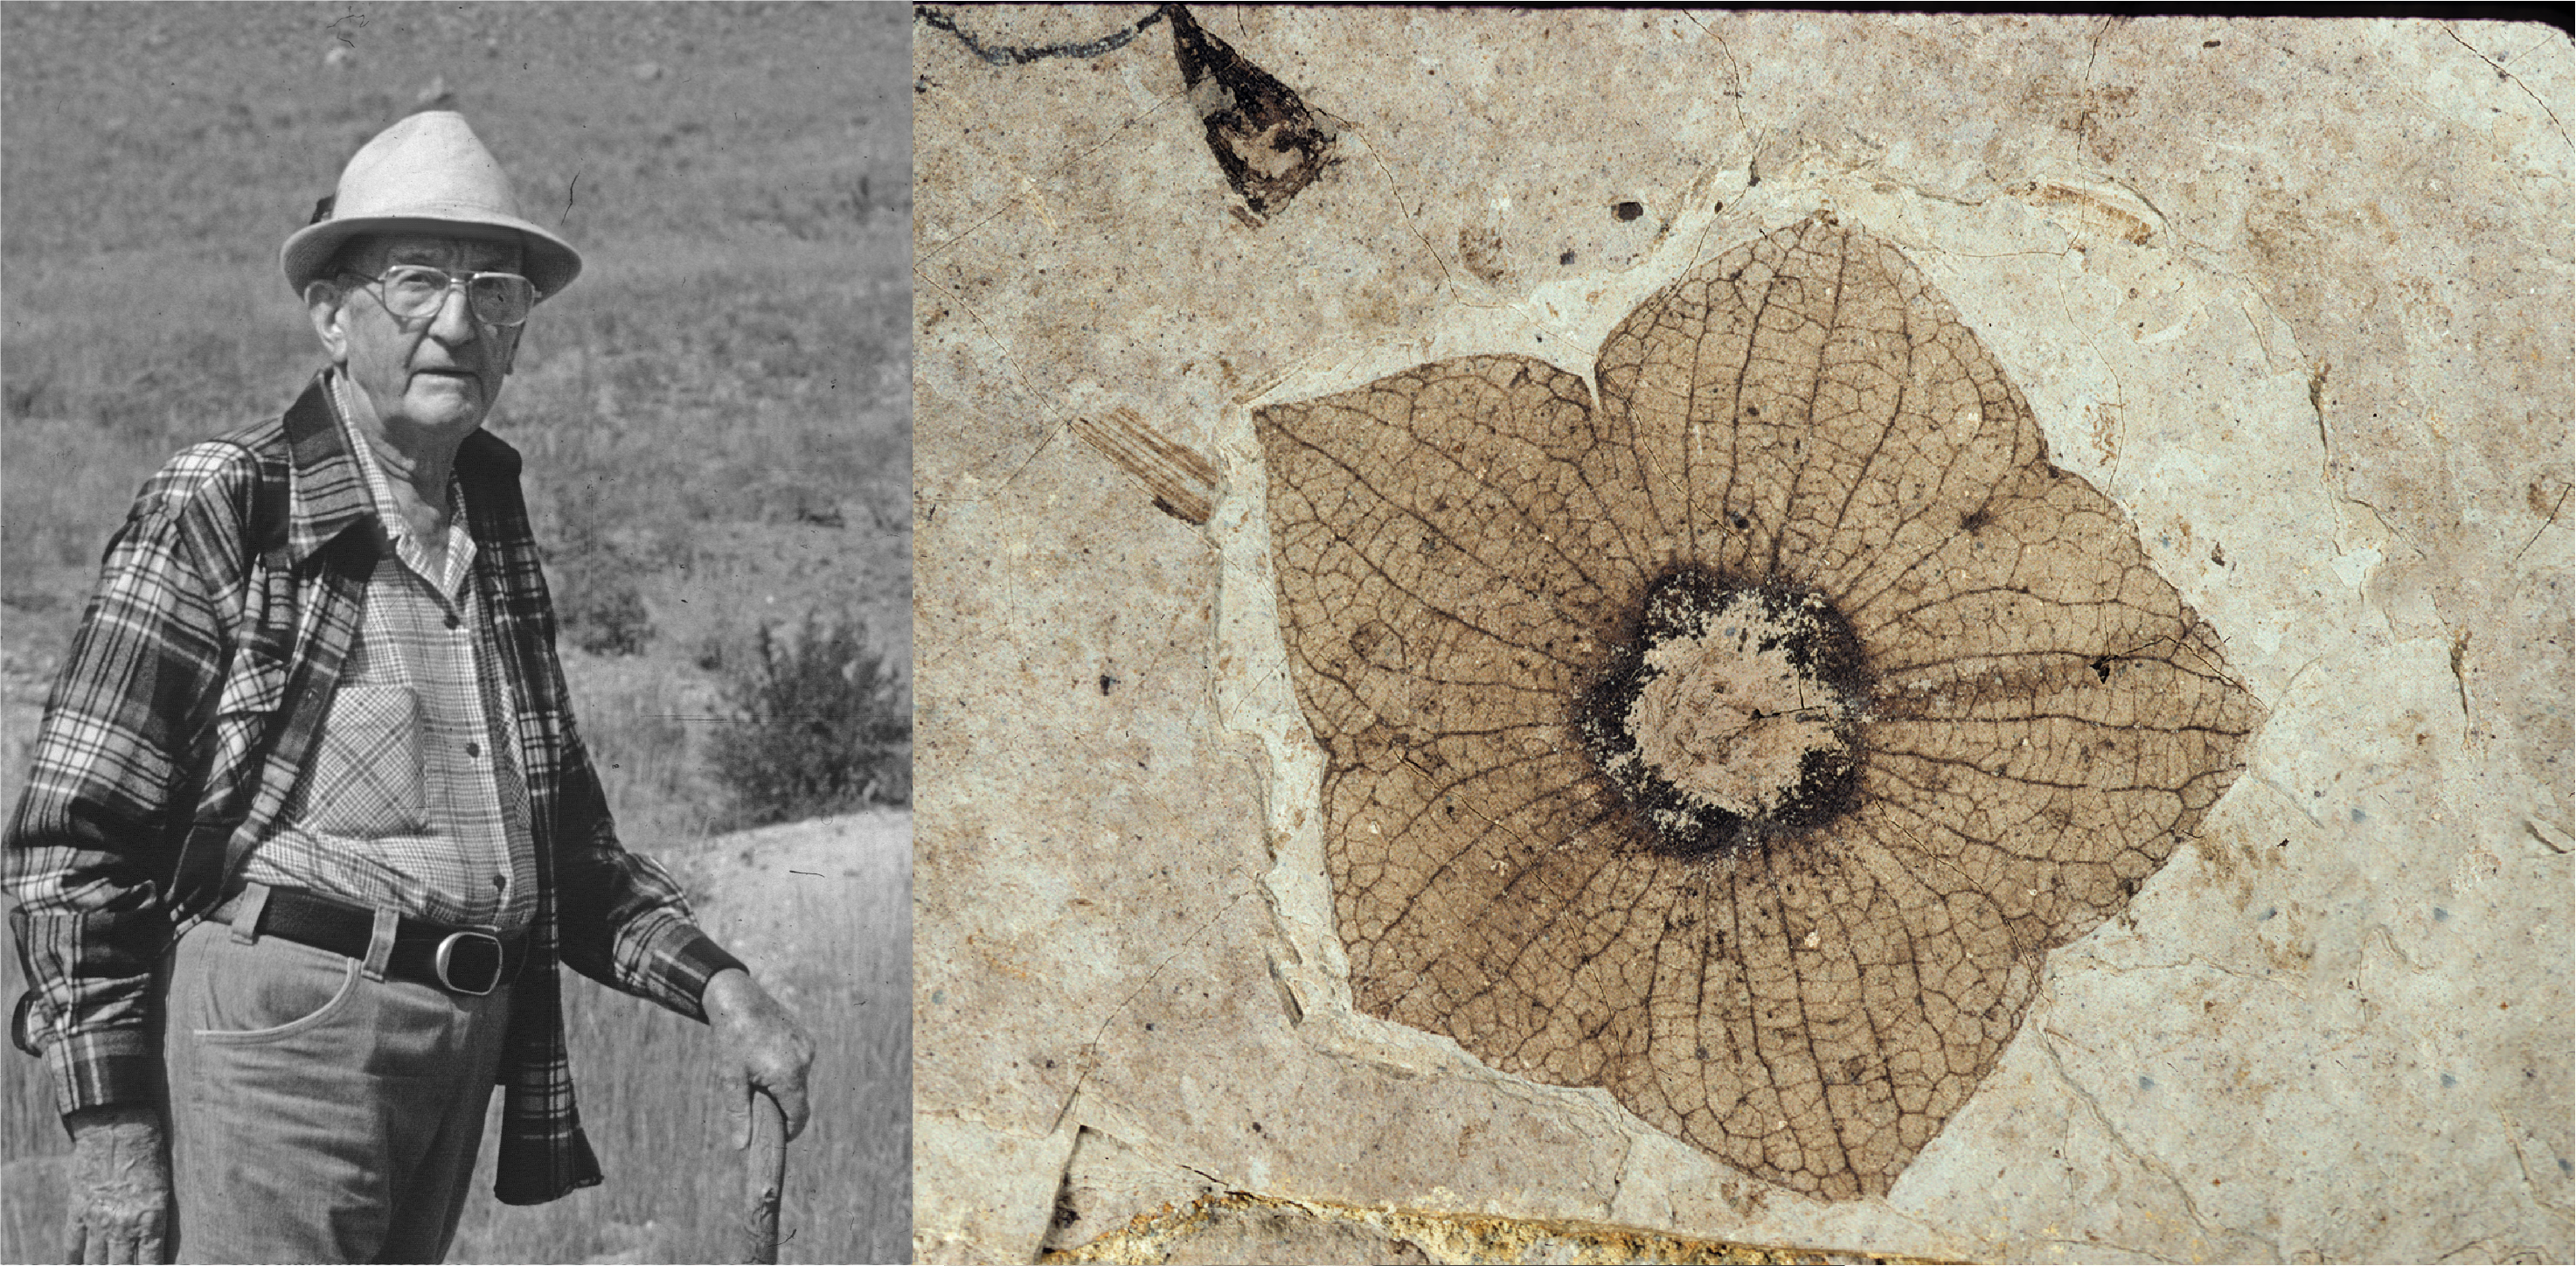 A man in a hat and glasses on the left and a fossil flower caylx on the right.